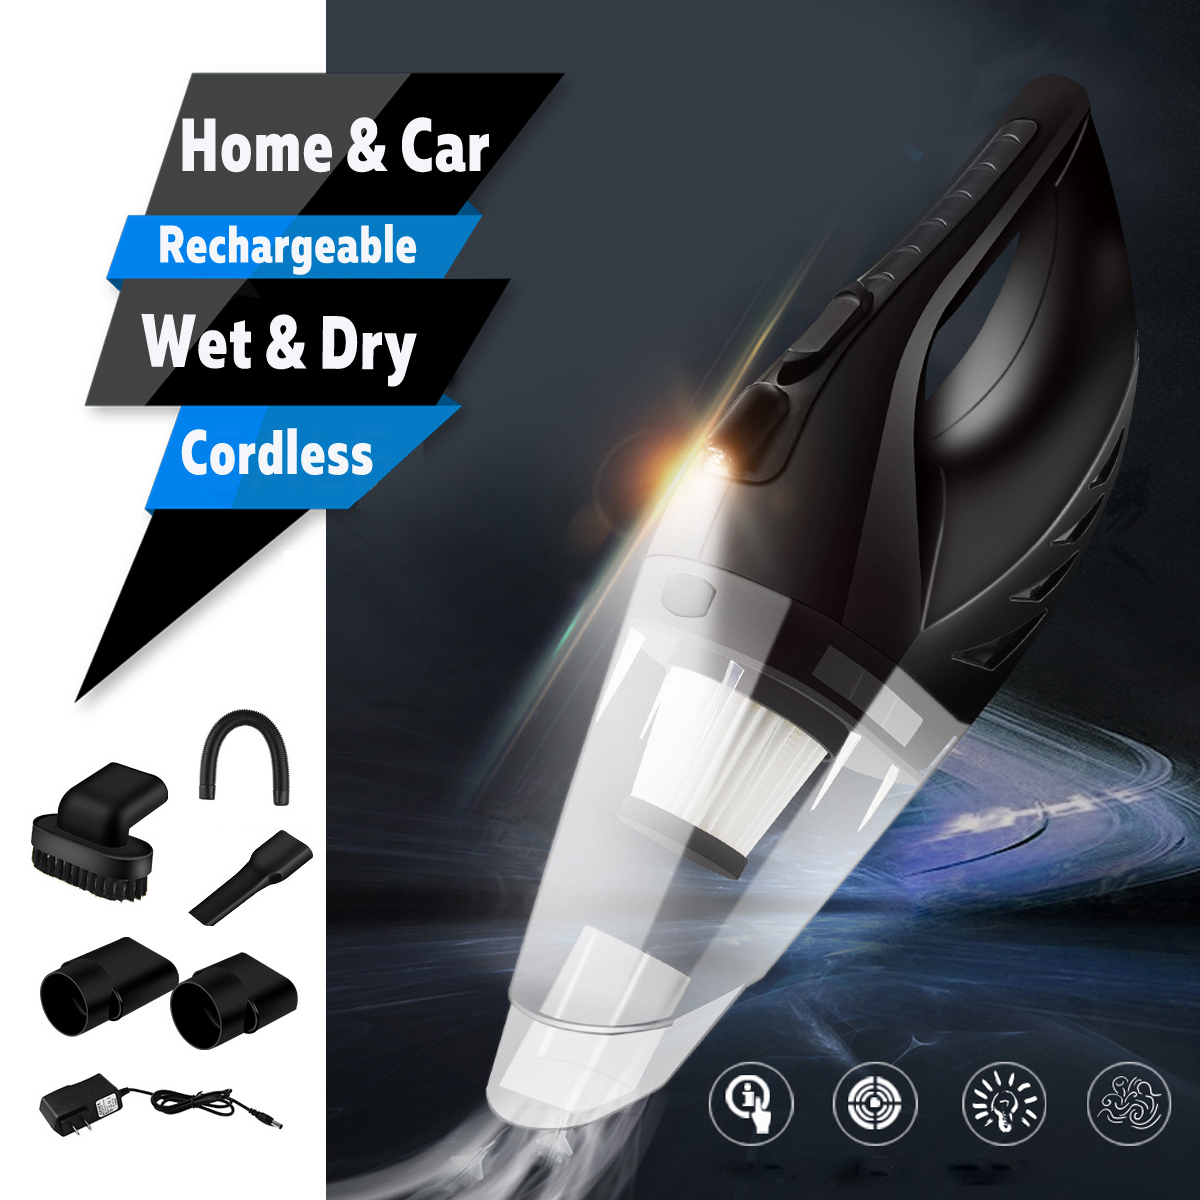 12V-150W-Cordless-Handheld-Vacuum-Cleaner-Strong-Suction-Dust-Busters-Wet--Dry-1423164-1